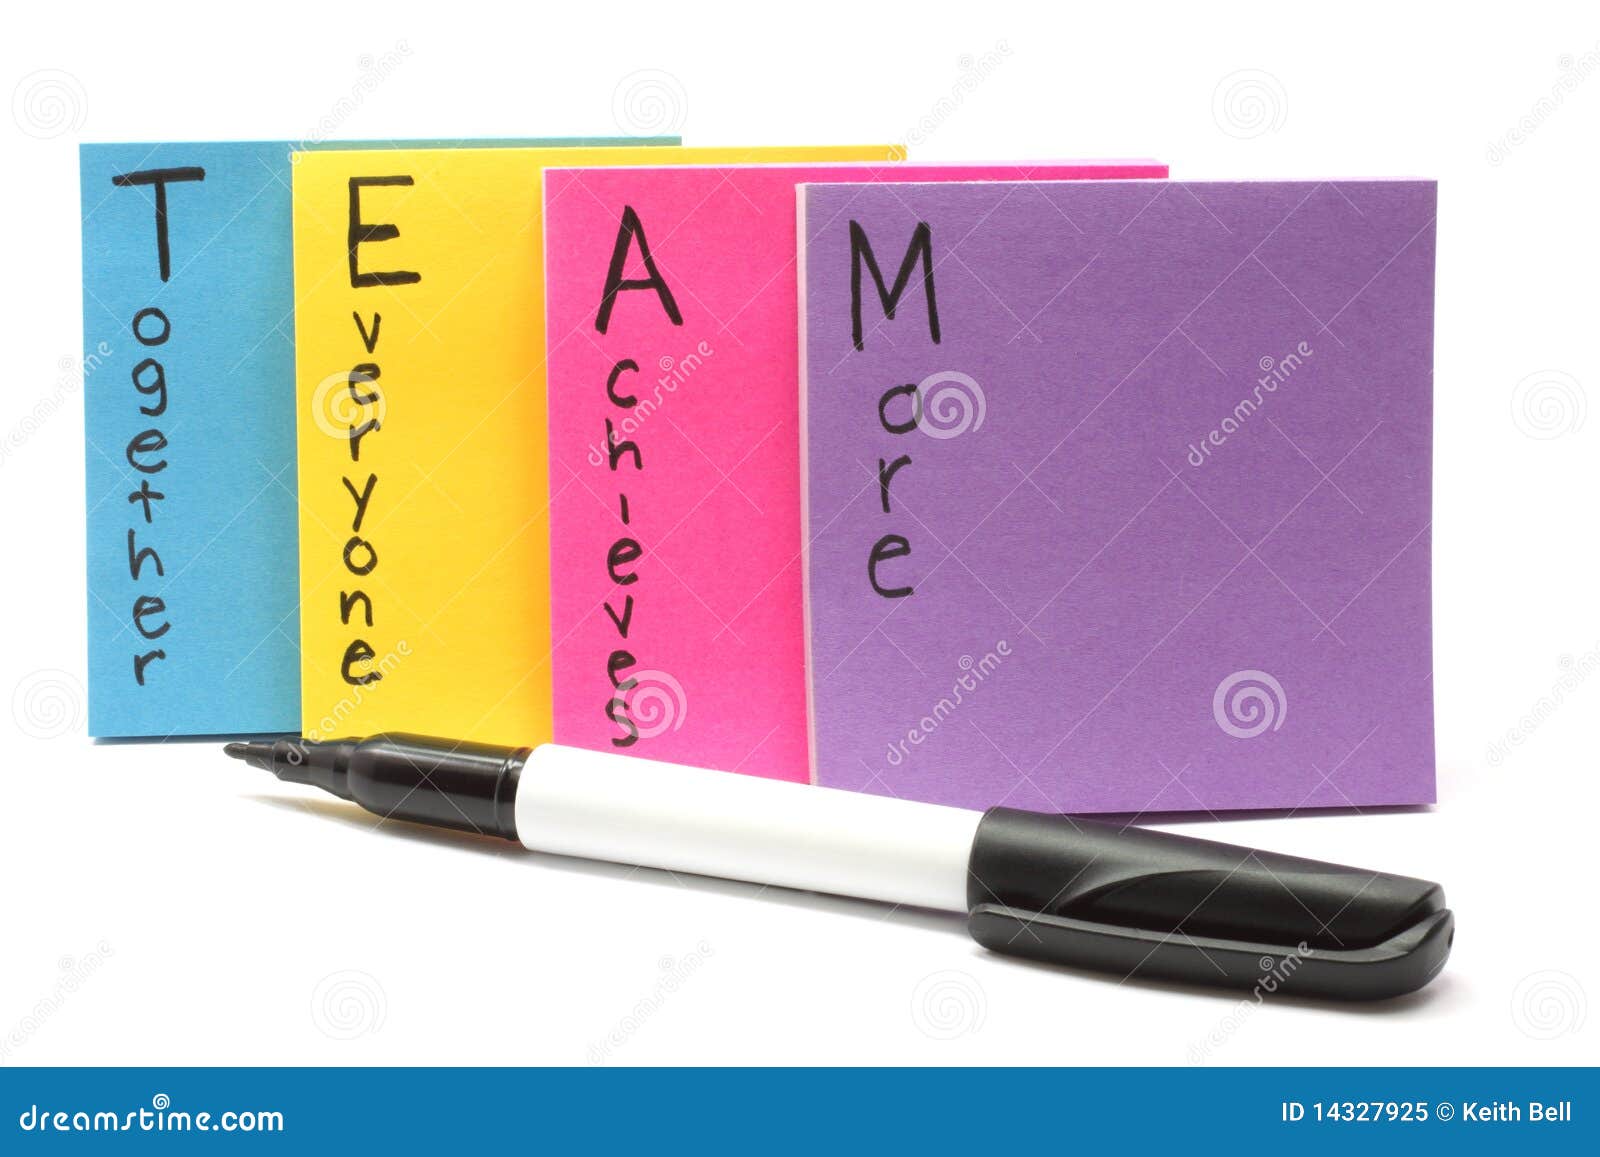 pen with team together everyone achieves more